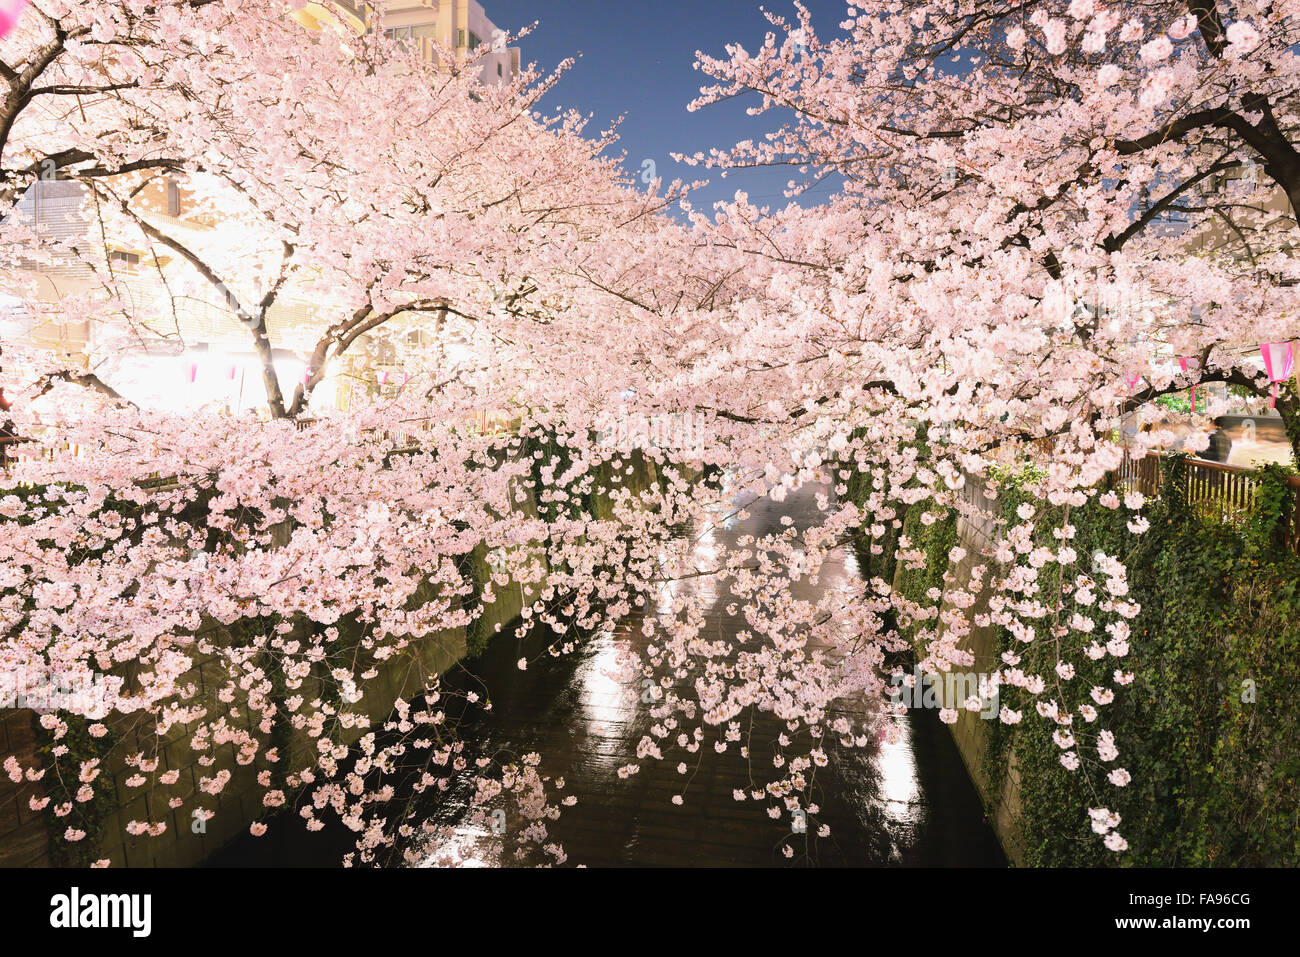 Cherry blossoms in full bloom at Meguro river, Tokyo, Japan Stock Photo